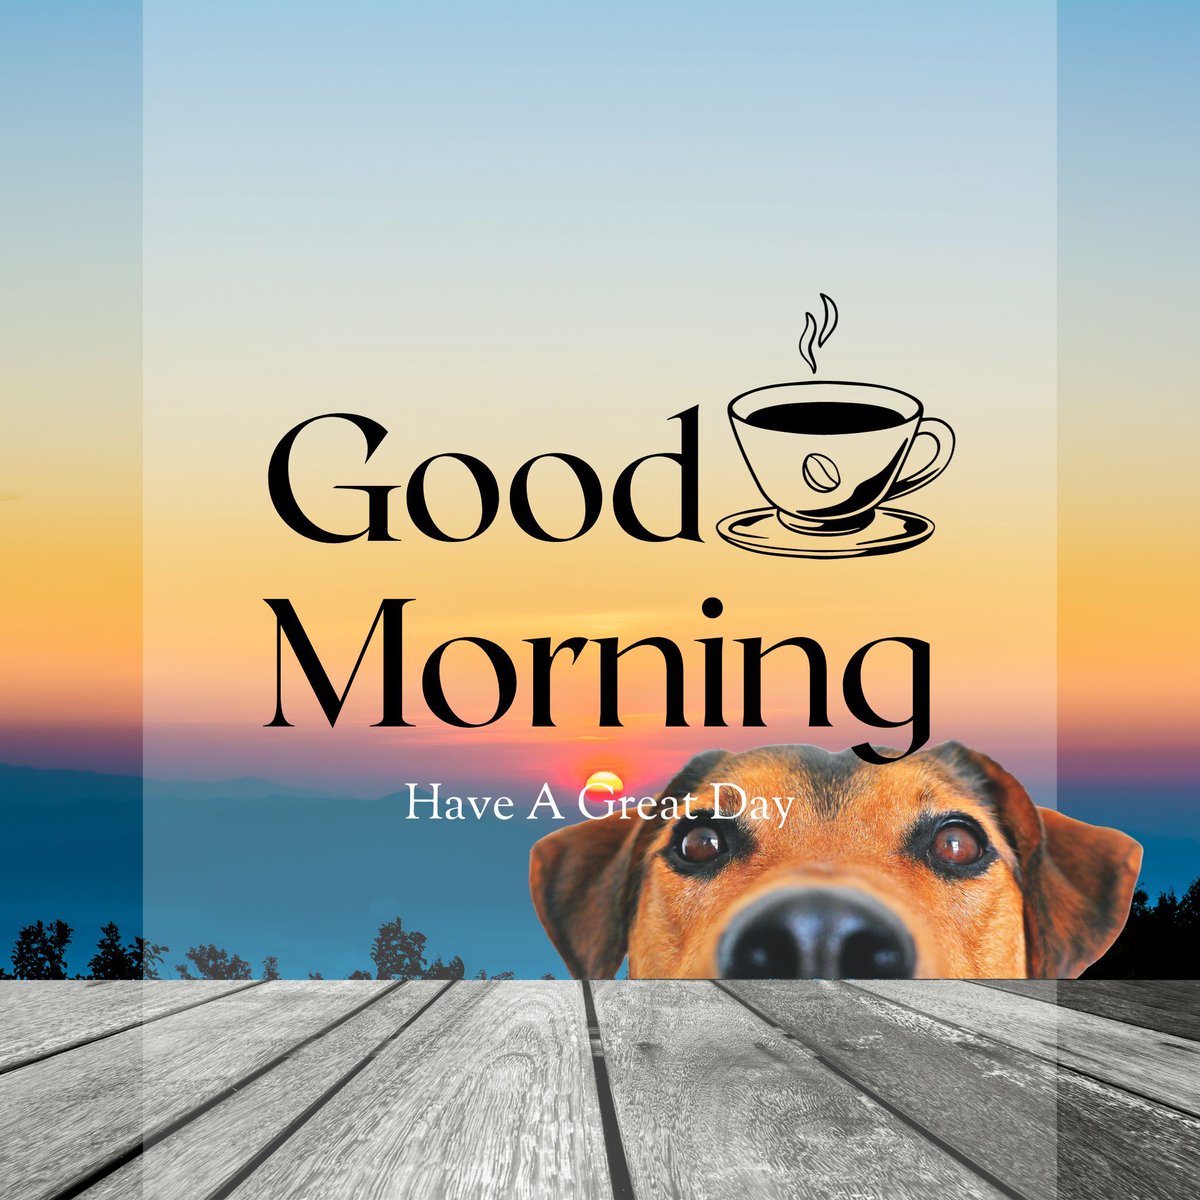 ☕ Good morning, coffee lovers! 

Grab your favorite brew, and let's conquer the day together. 

☕❤️ #CoffeeTime #dogs #DogLove #PetParents #TrainingGoals #DogEducation #HappyPuppy